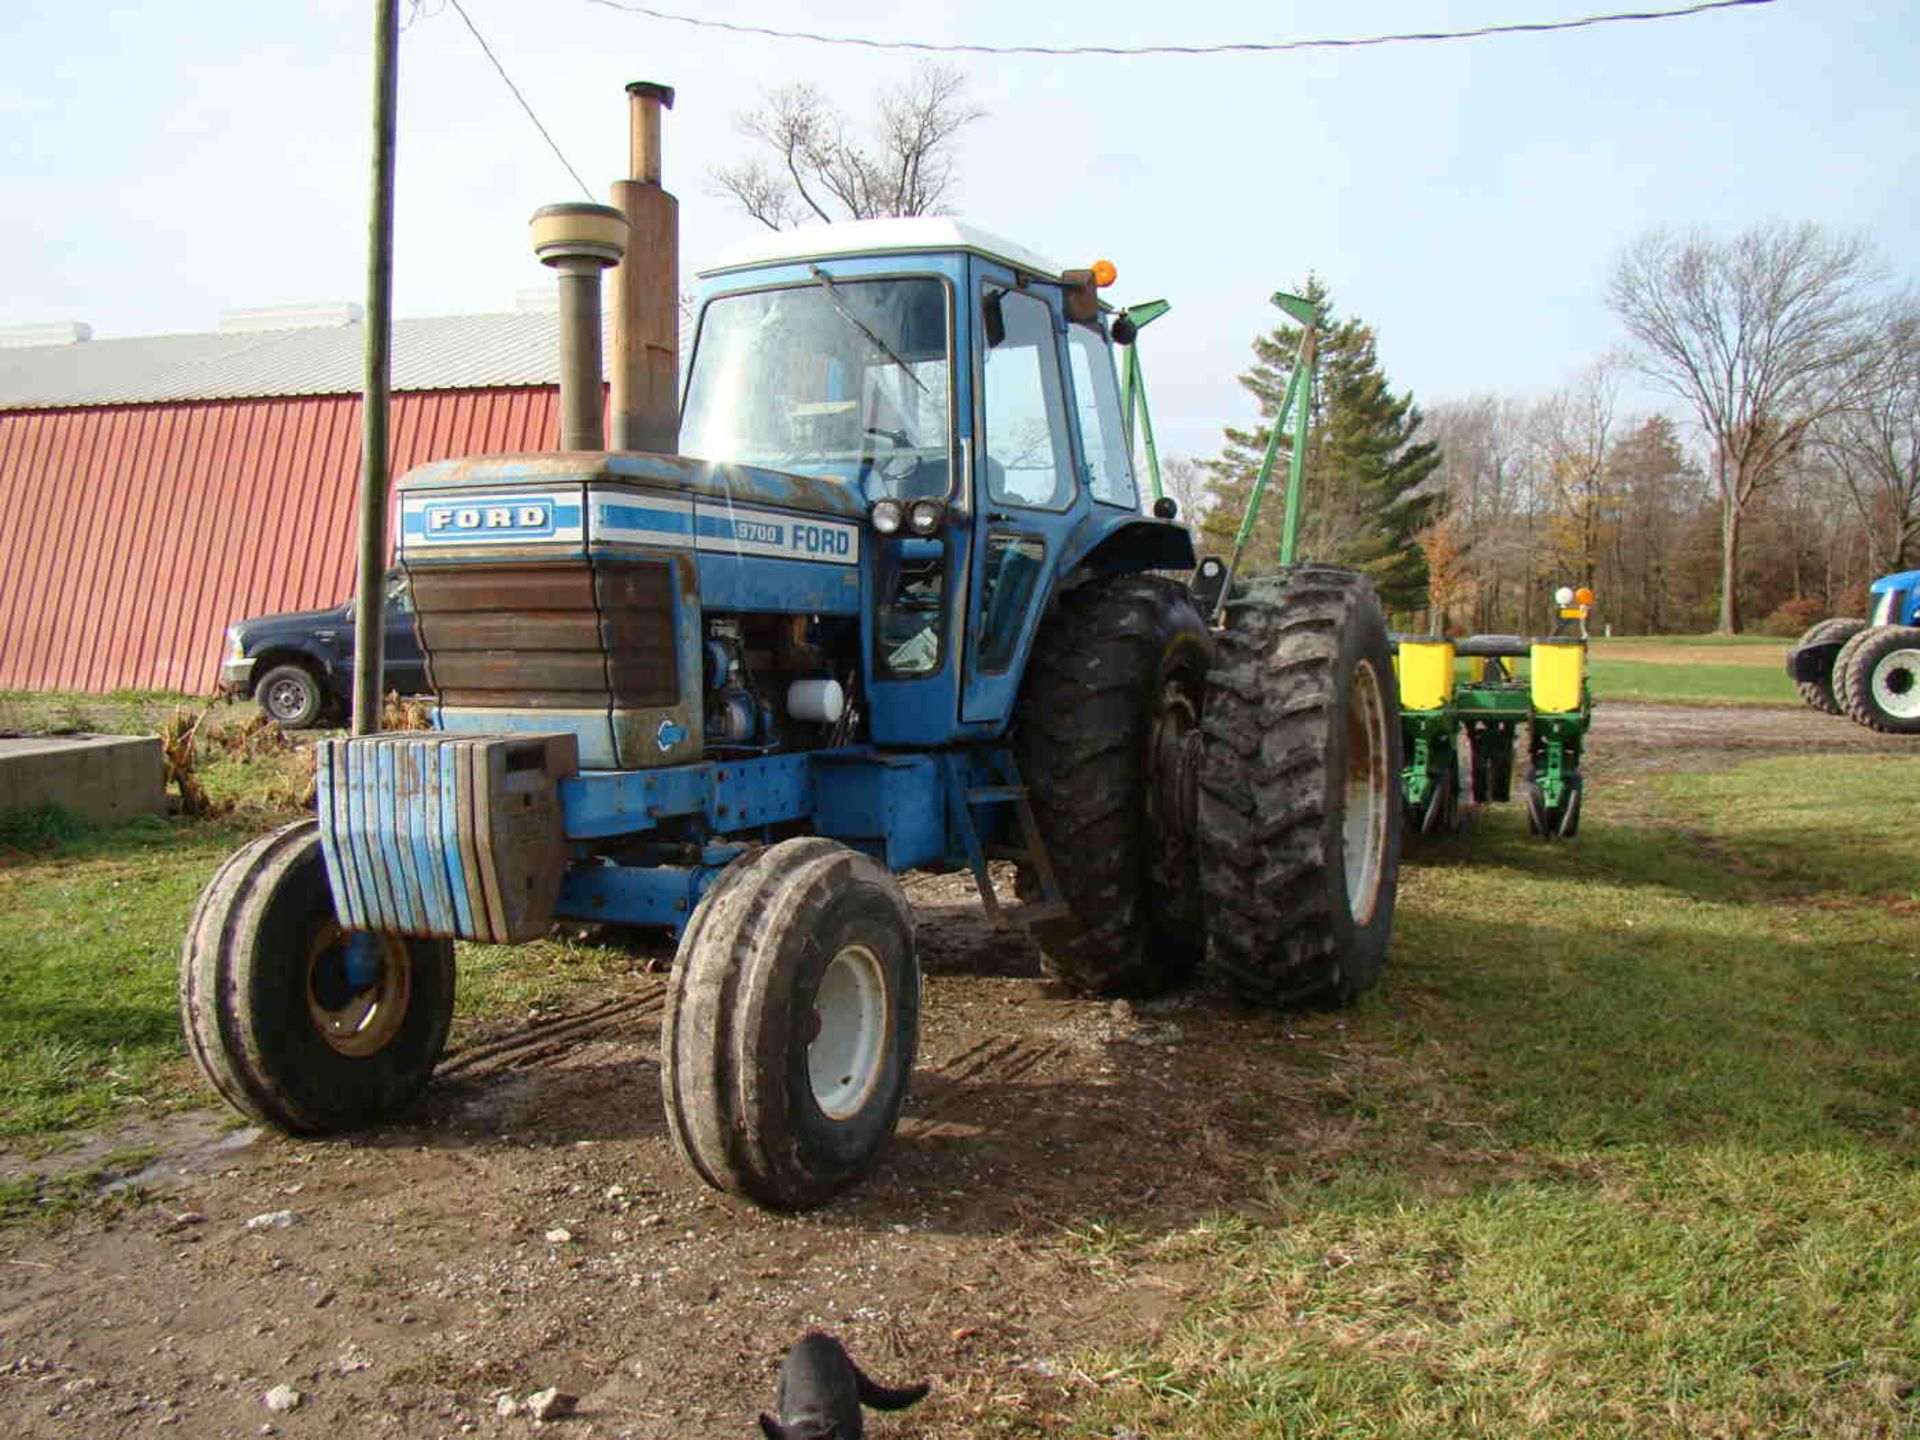 1978 Ford 9700 2wd tractor 8,272 hrs, w/duals Firestone 18.4-38, serial H2577B - Image 7 of 9